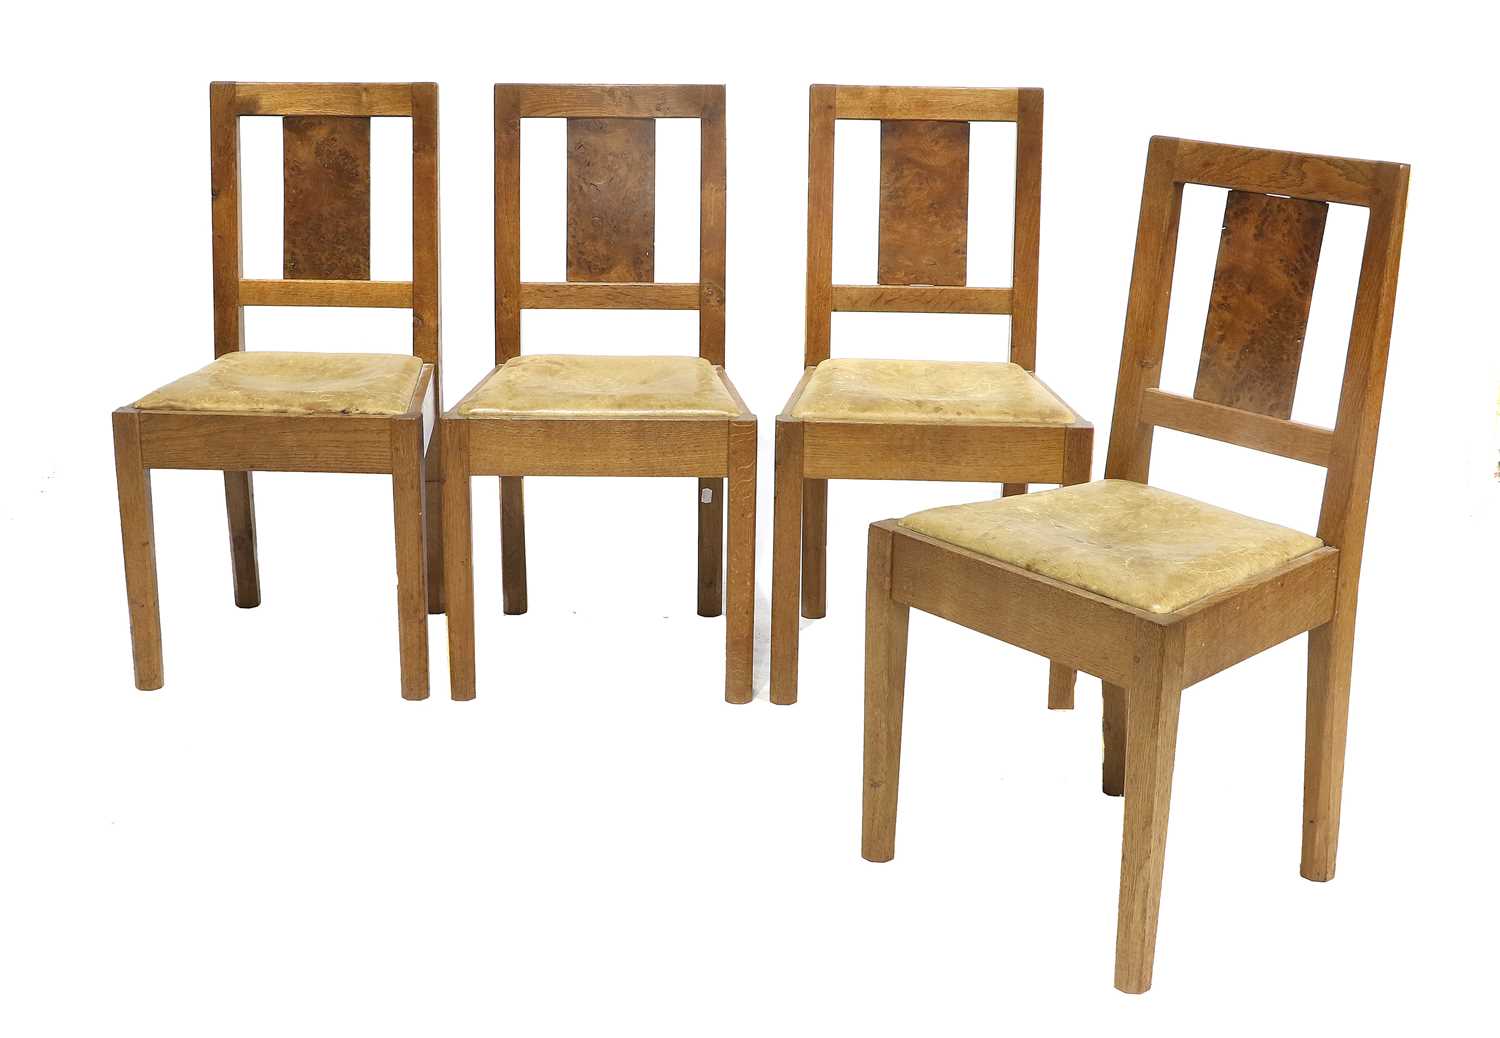 A Set of Four English Oak Dining Chairs, each with burr oak slat back panels, leather hide